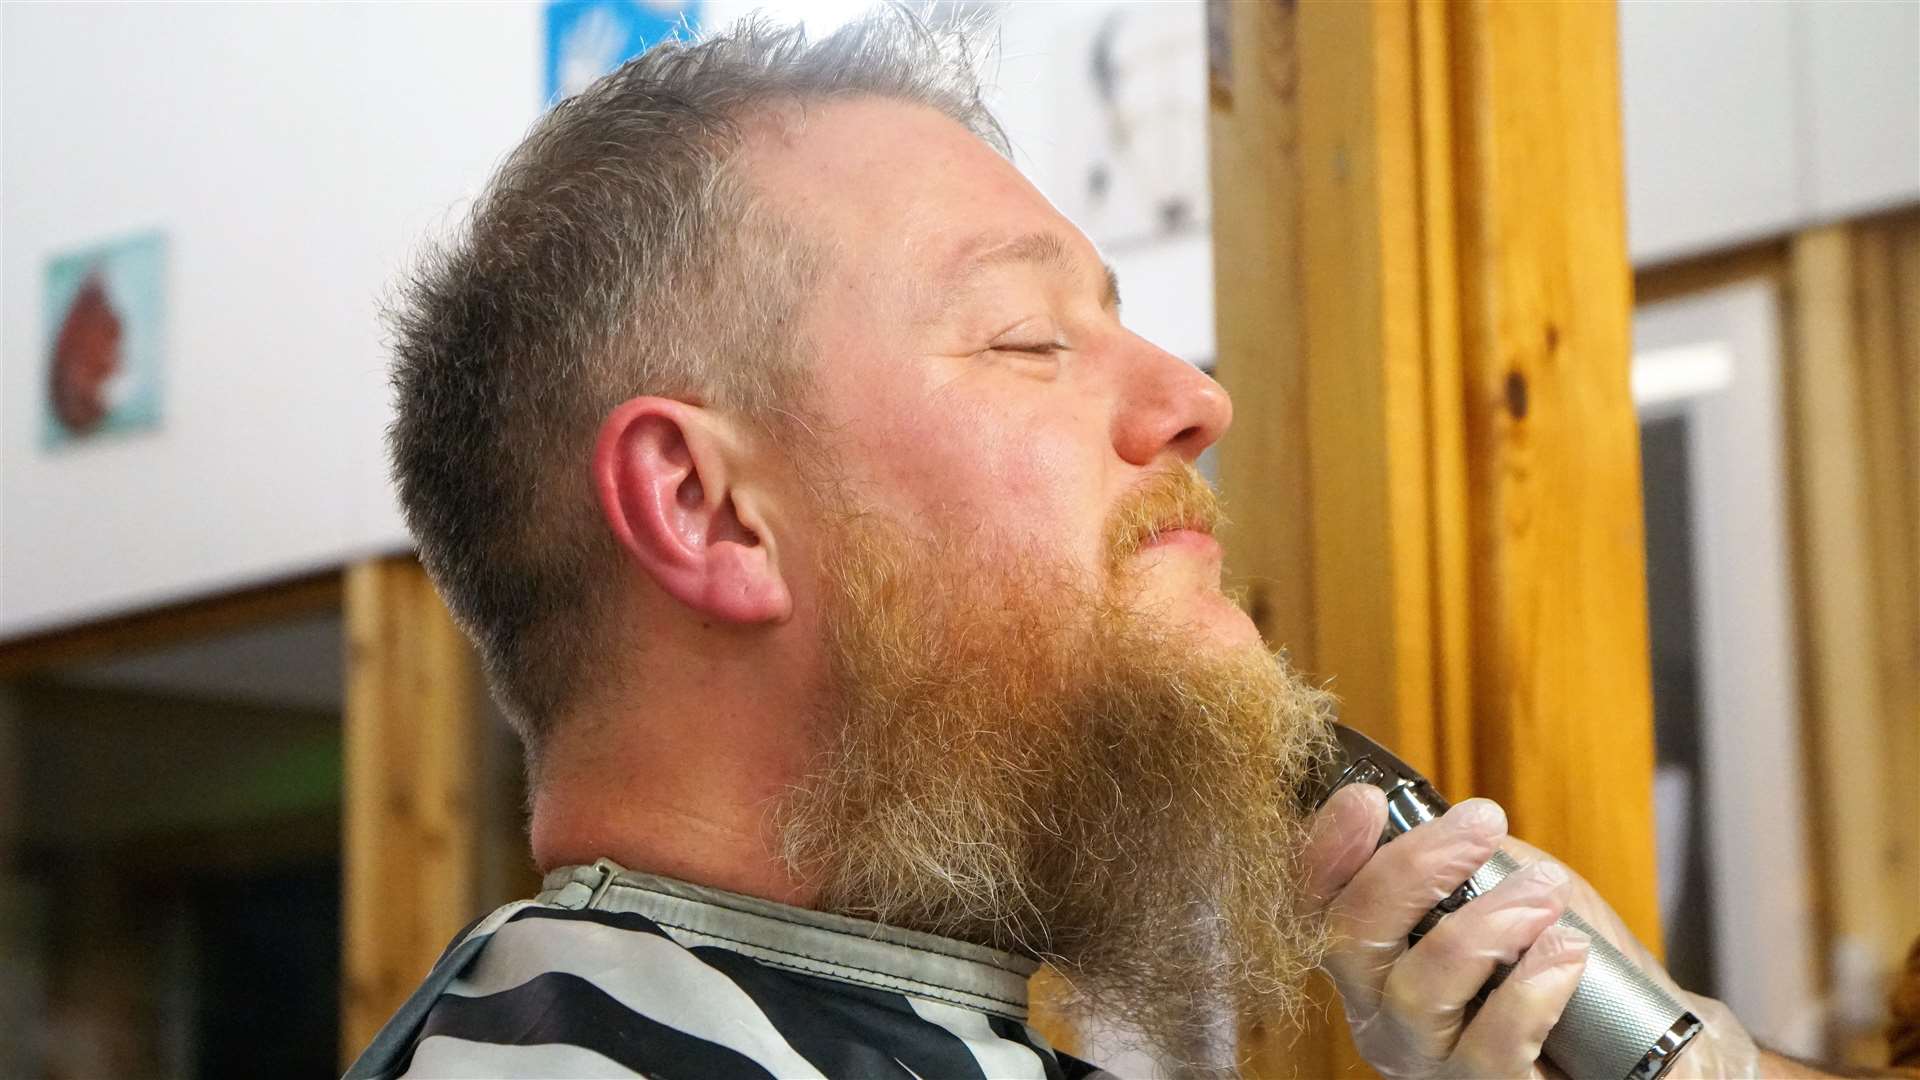 The last moments of a Thurso beard play out. Picture: DGS